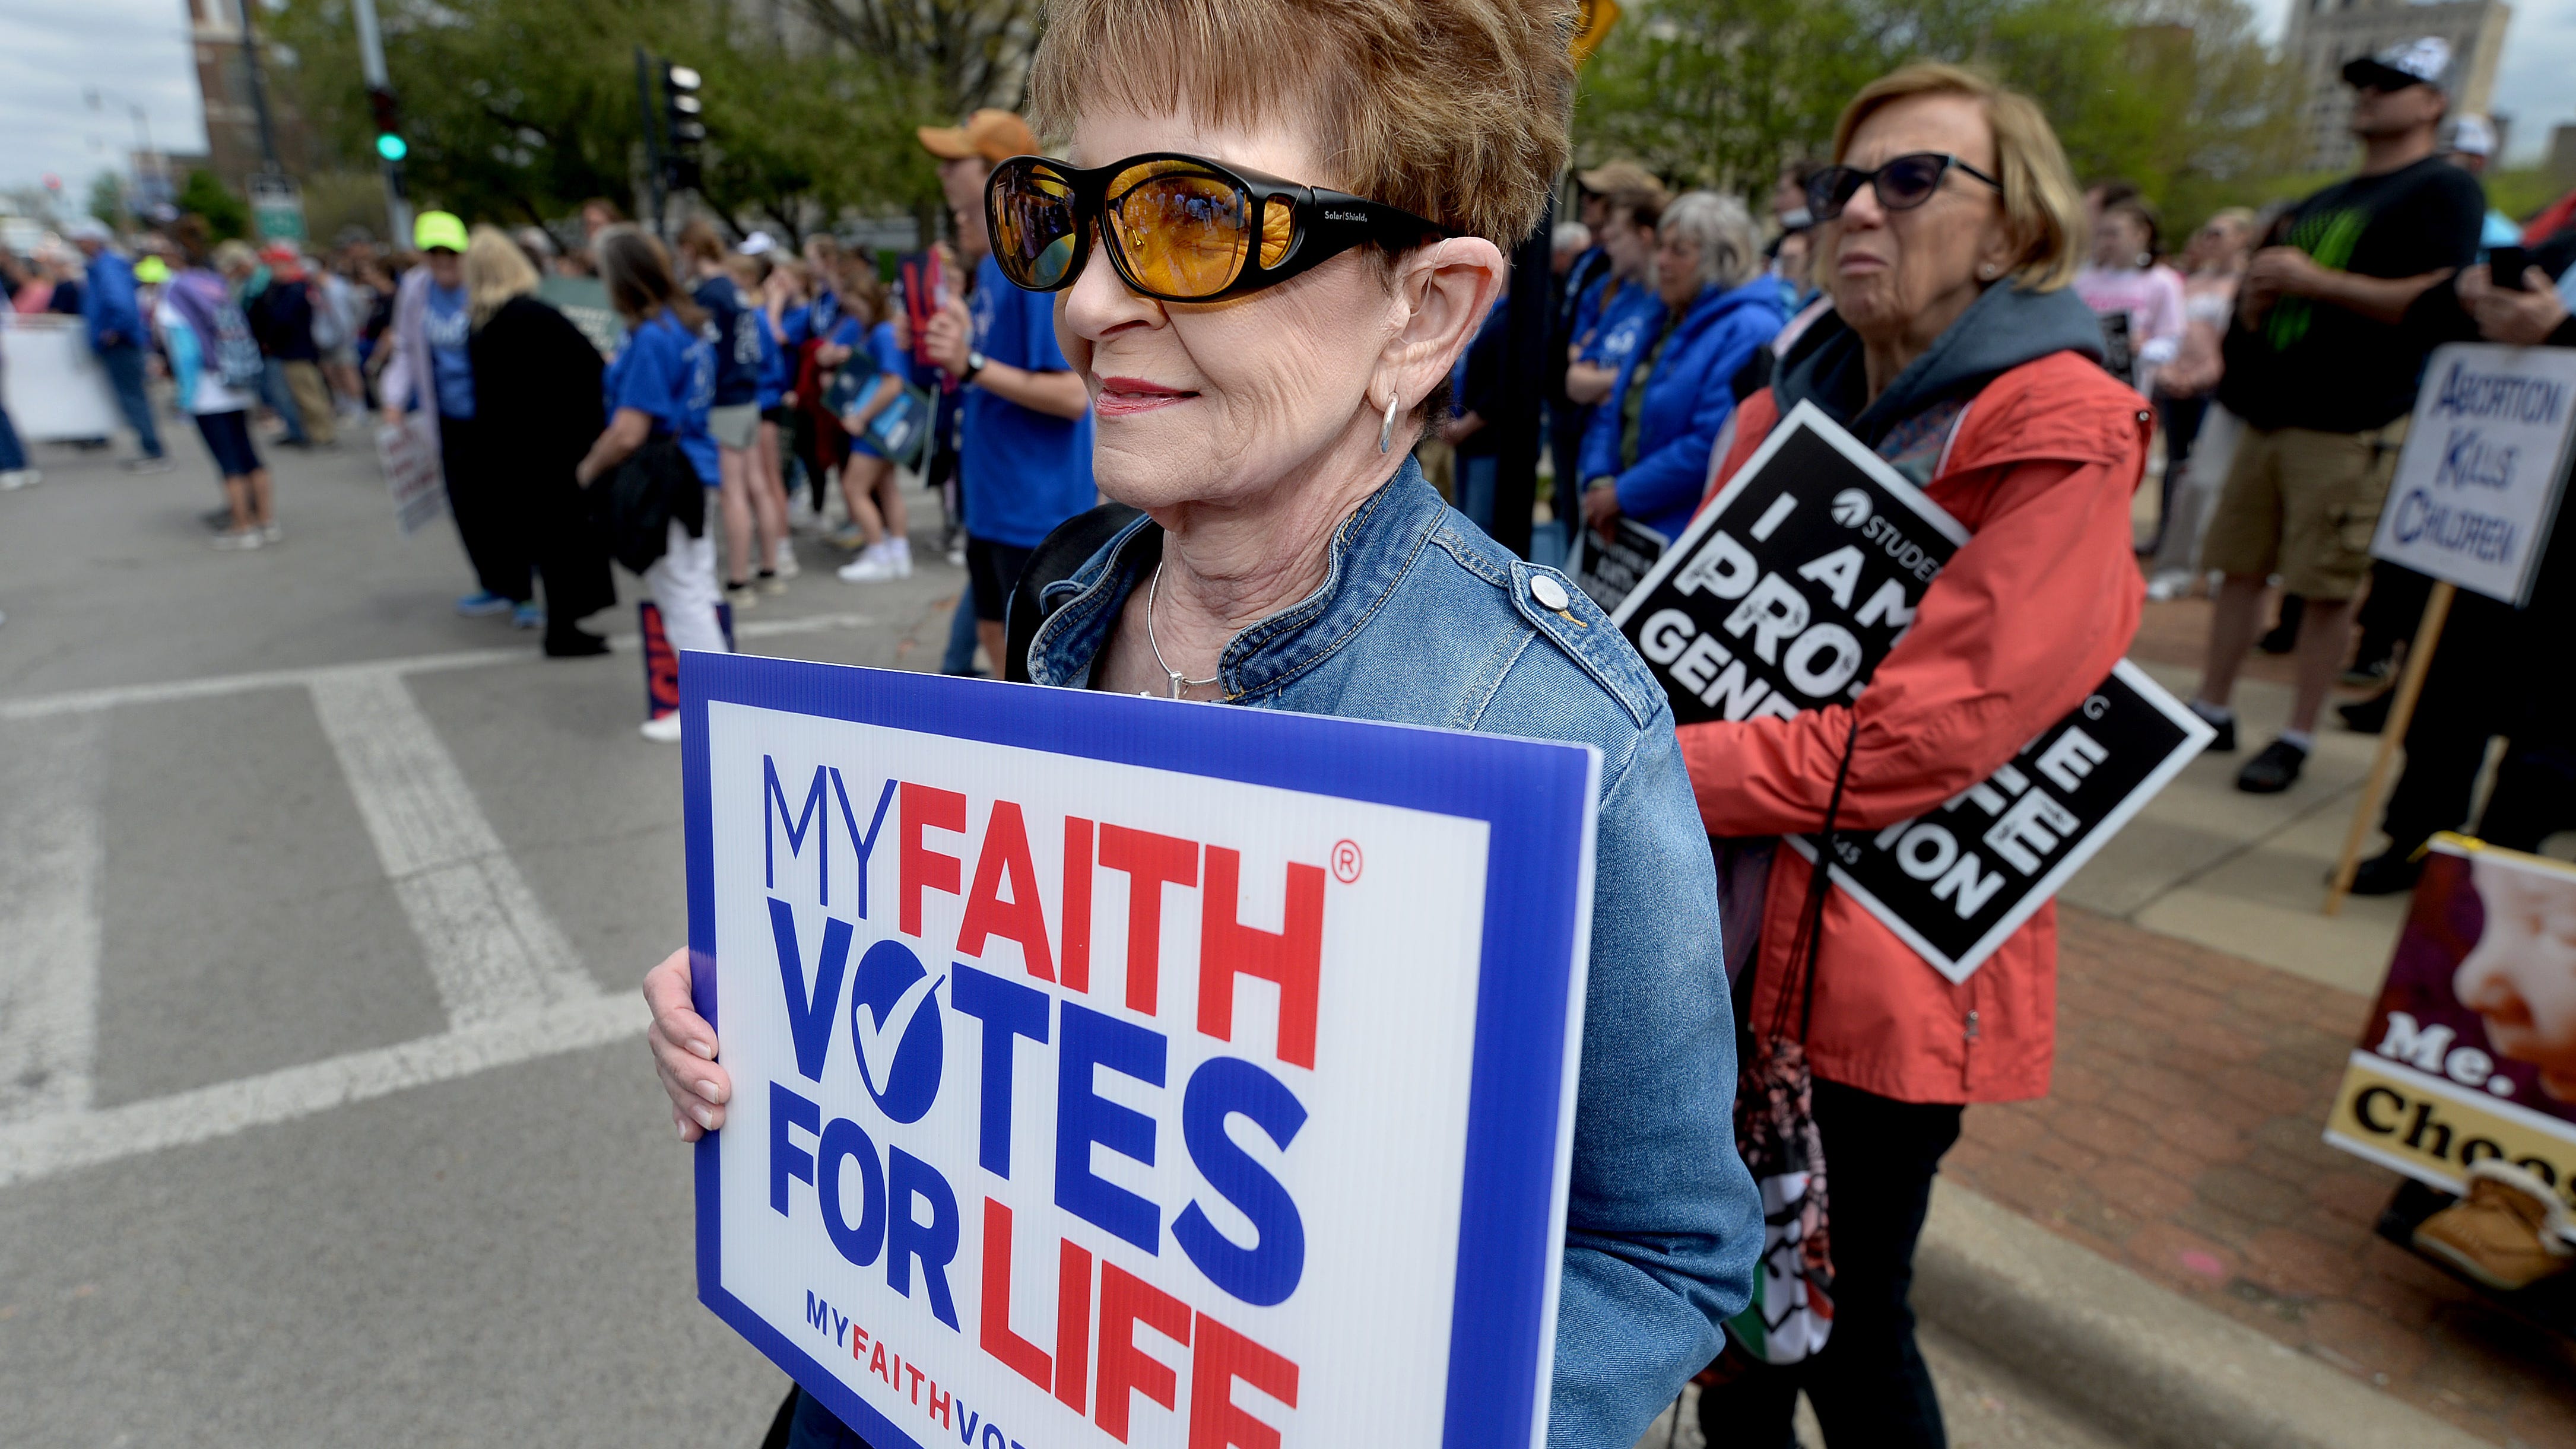 Why abortion views could play a role in Illinois elections this year